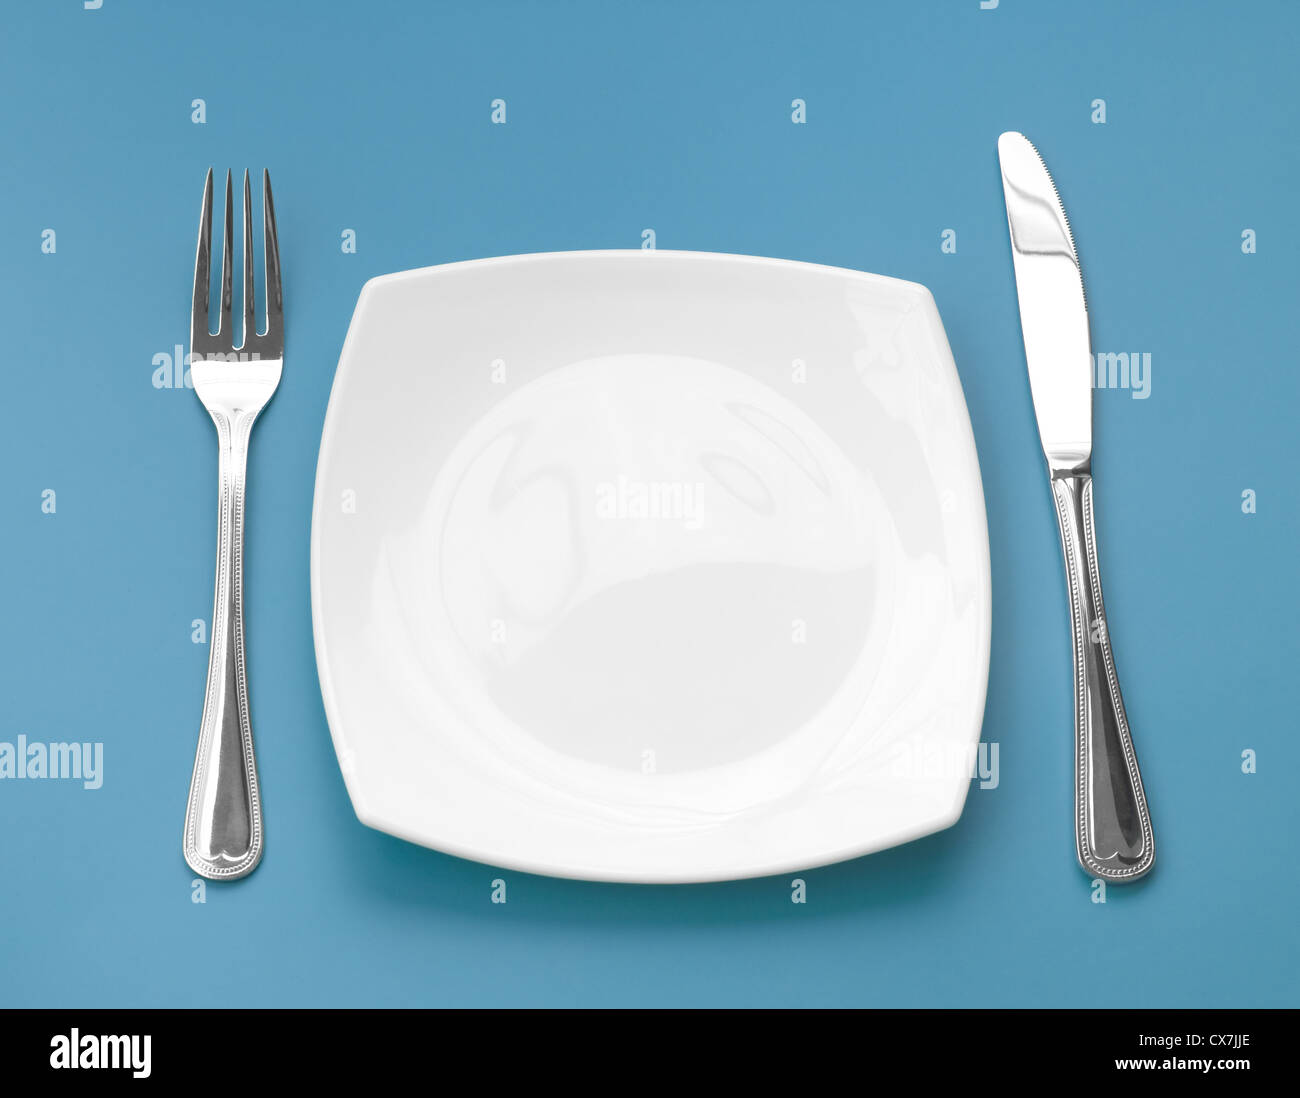 Knife, square white plate and fork on green background Stock Photo